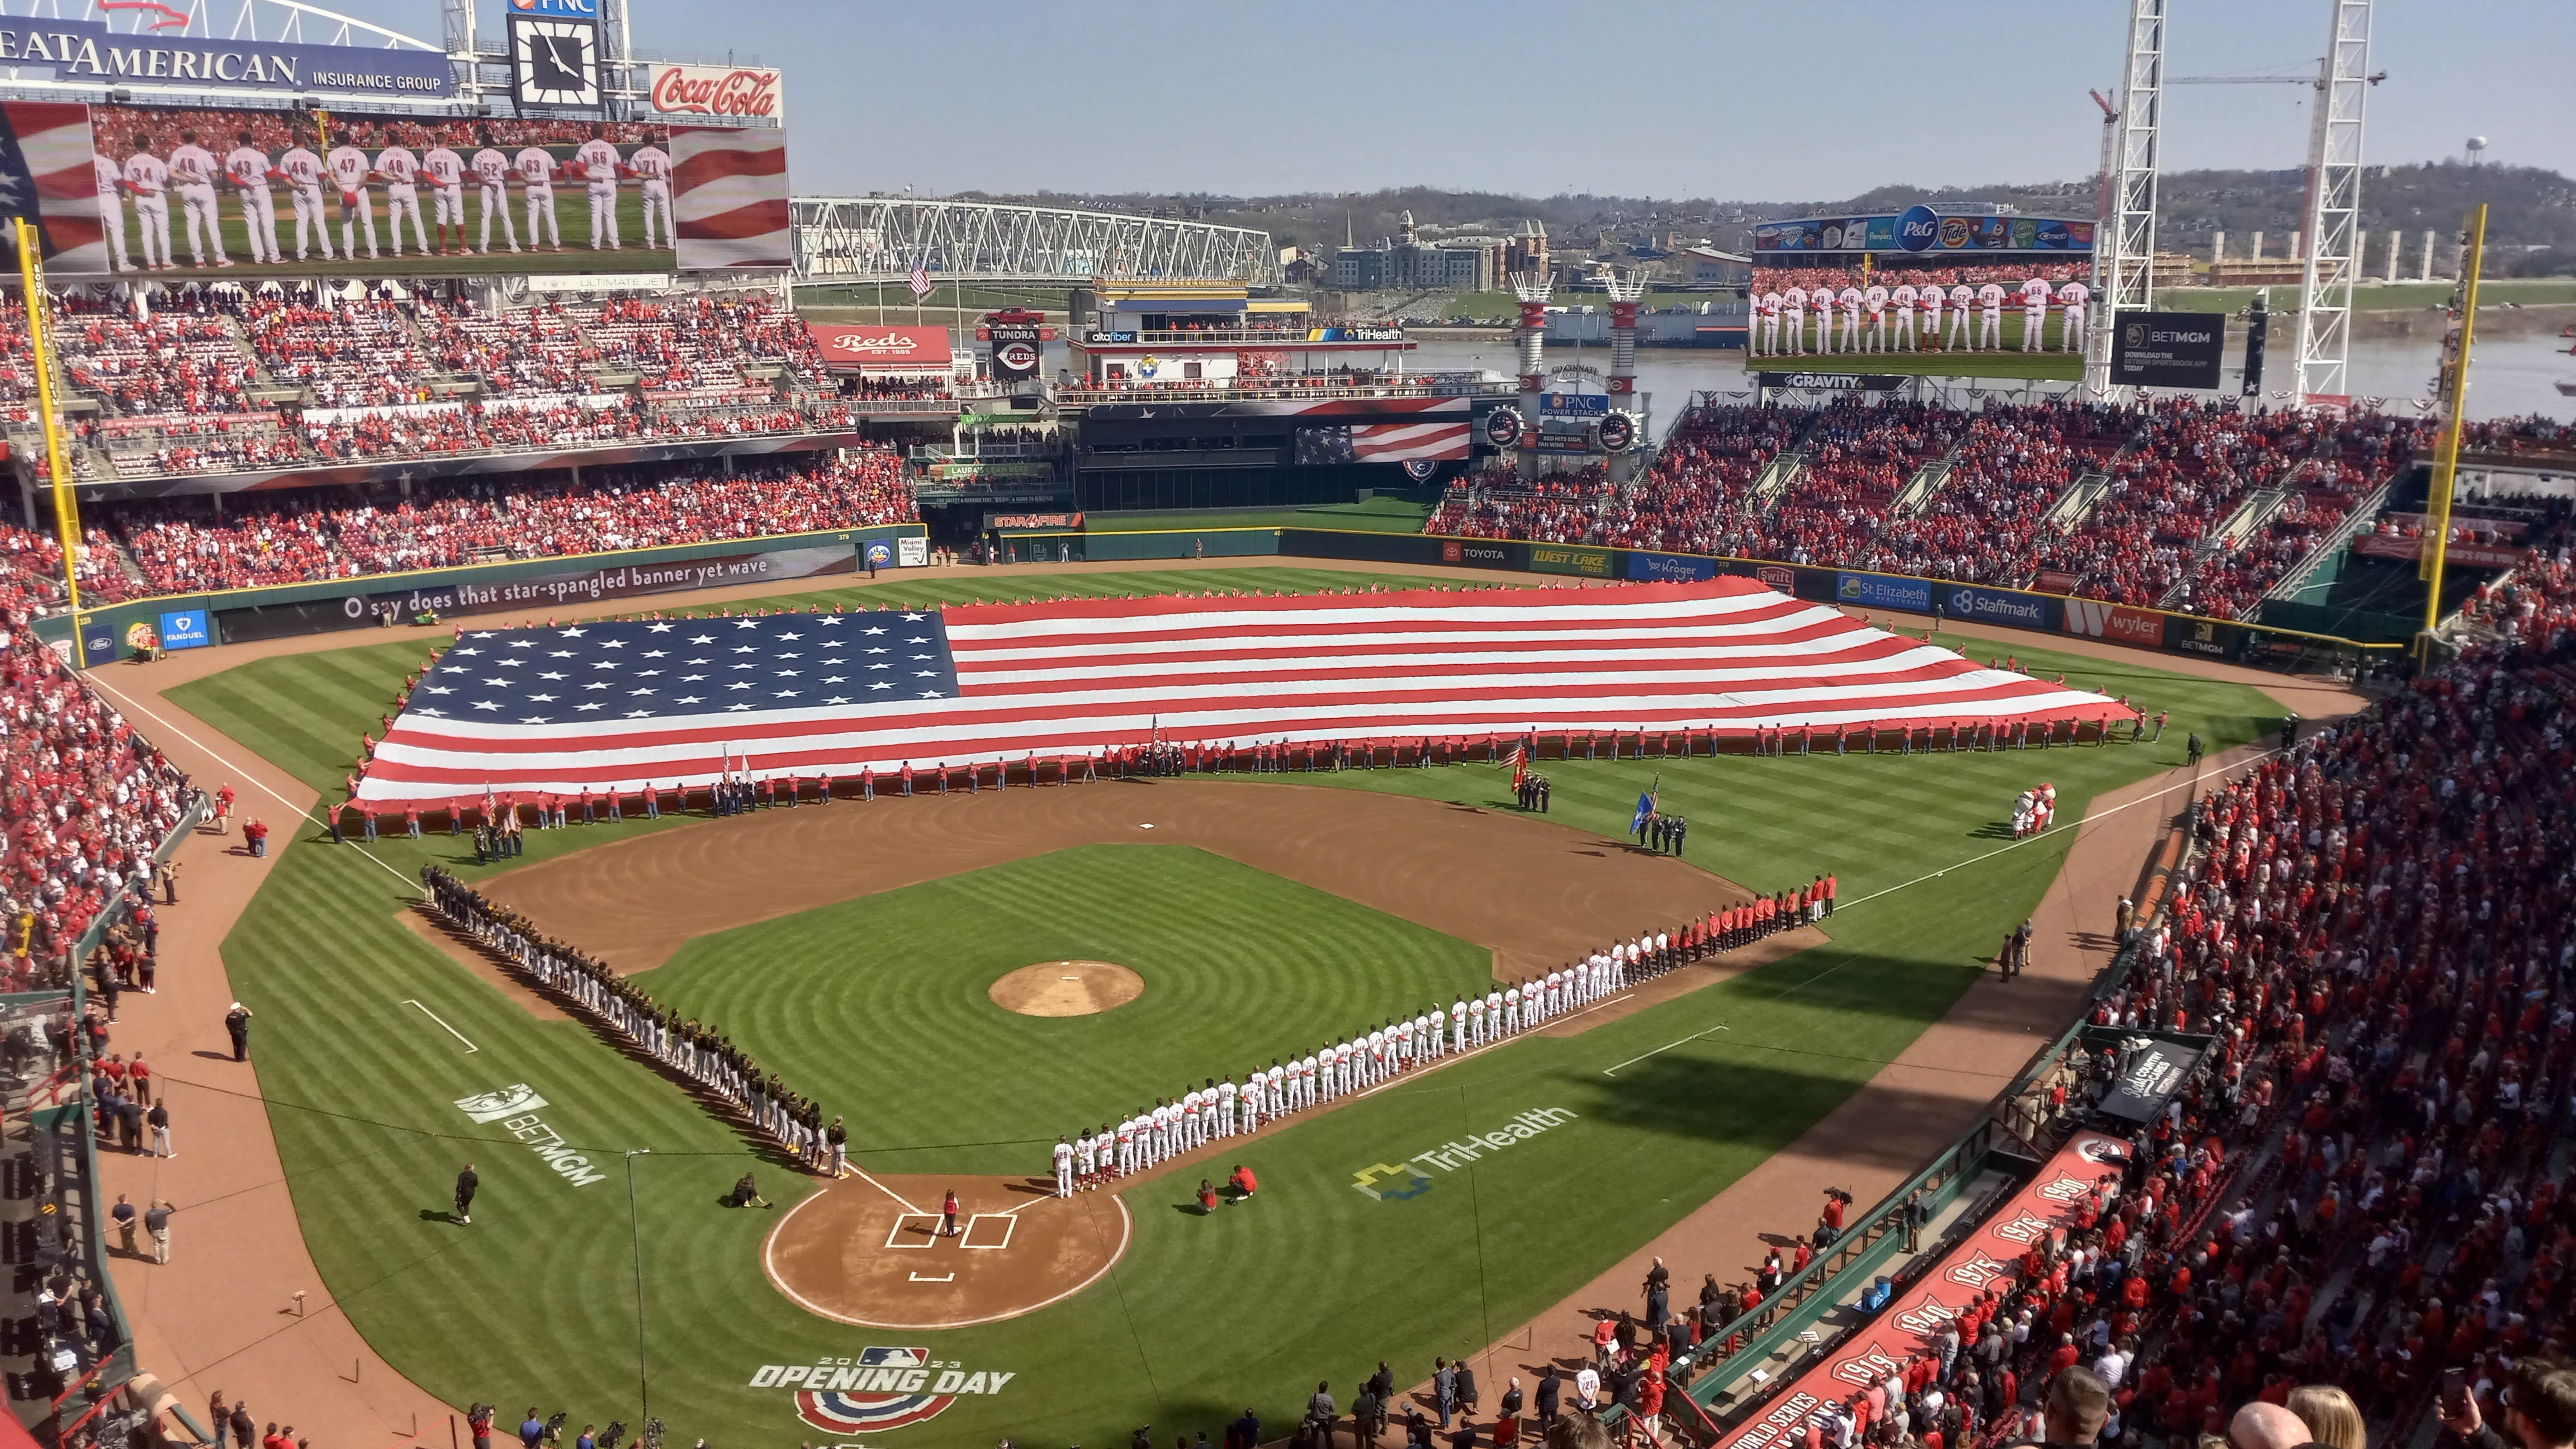 RED's Opening Day - 300 foot by 150 foot American Flag